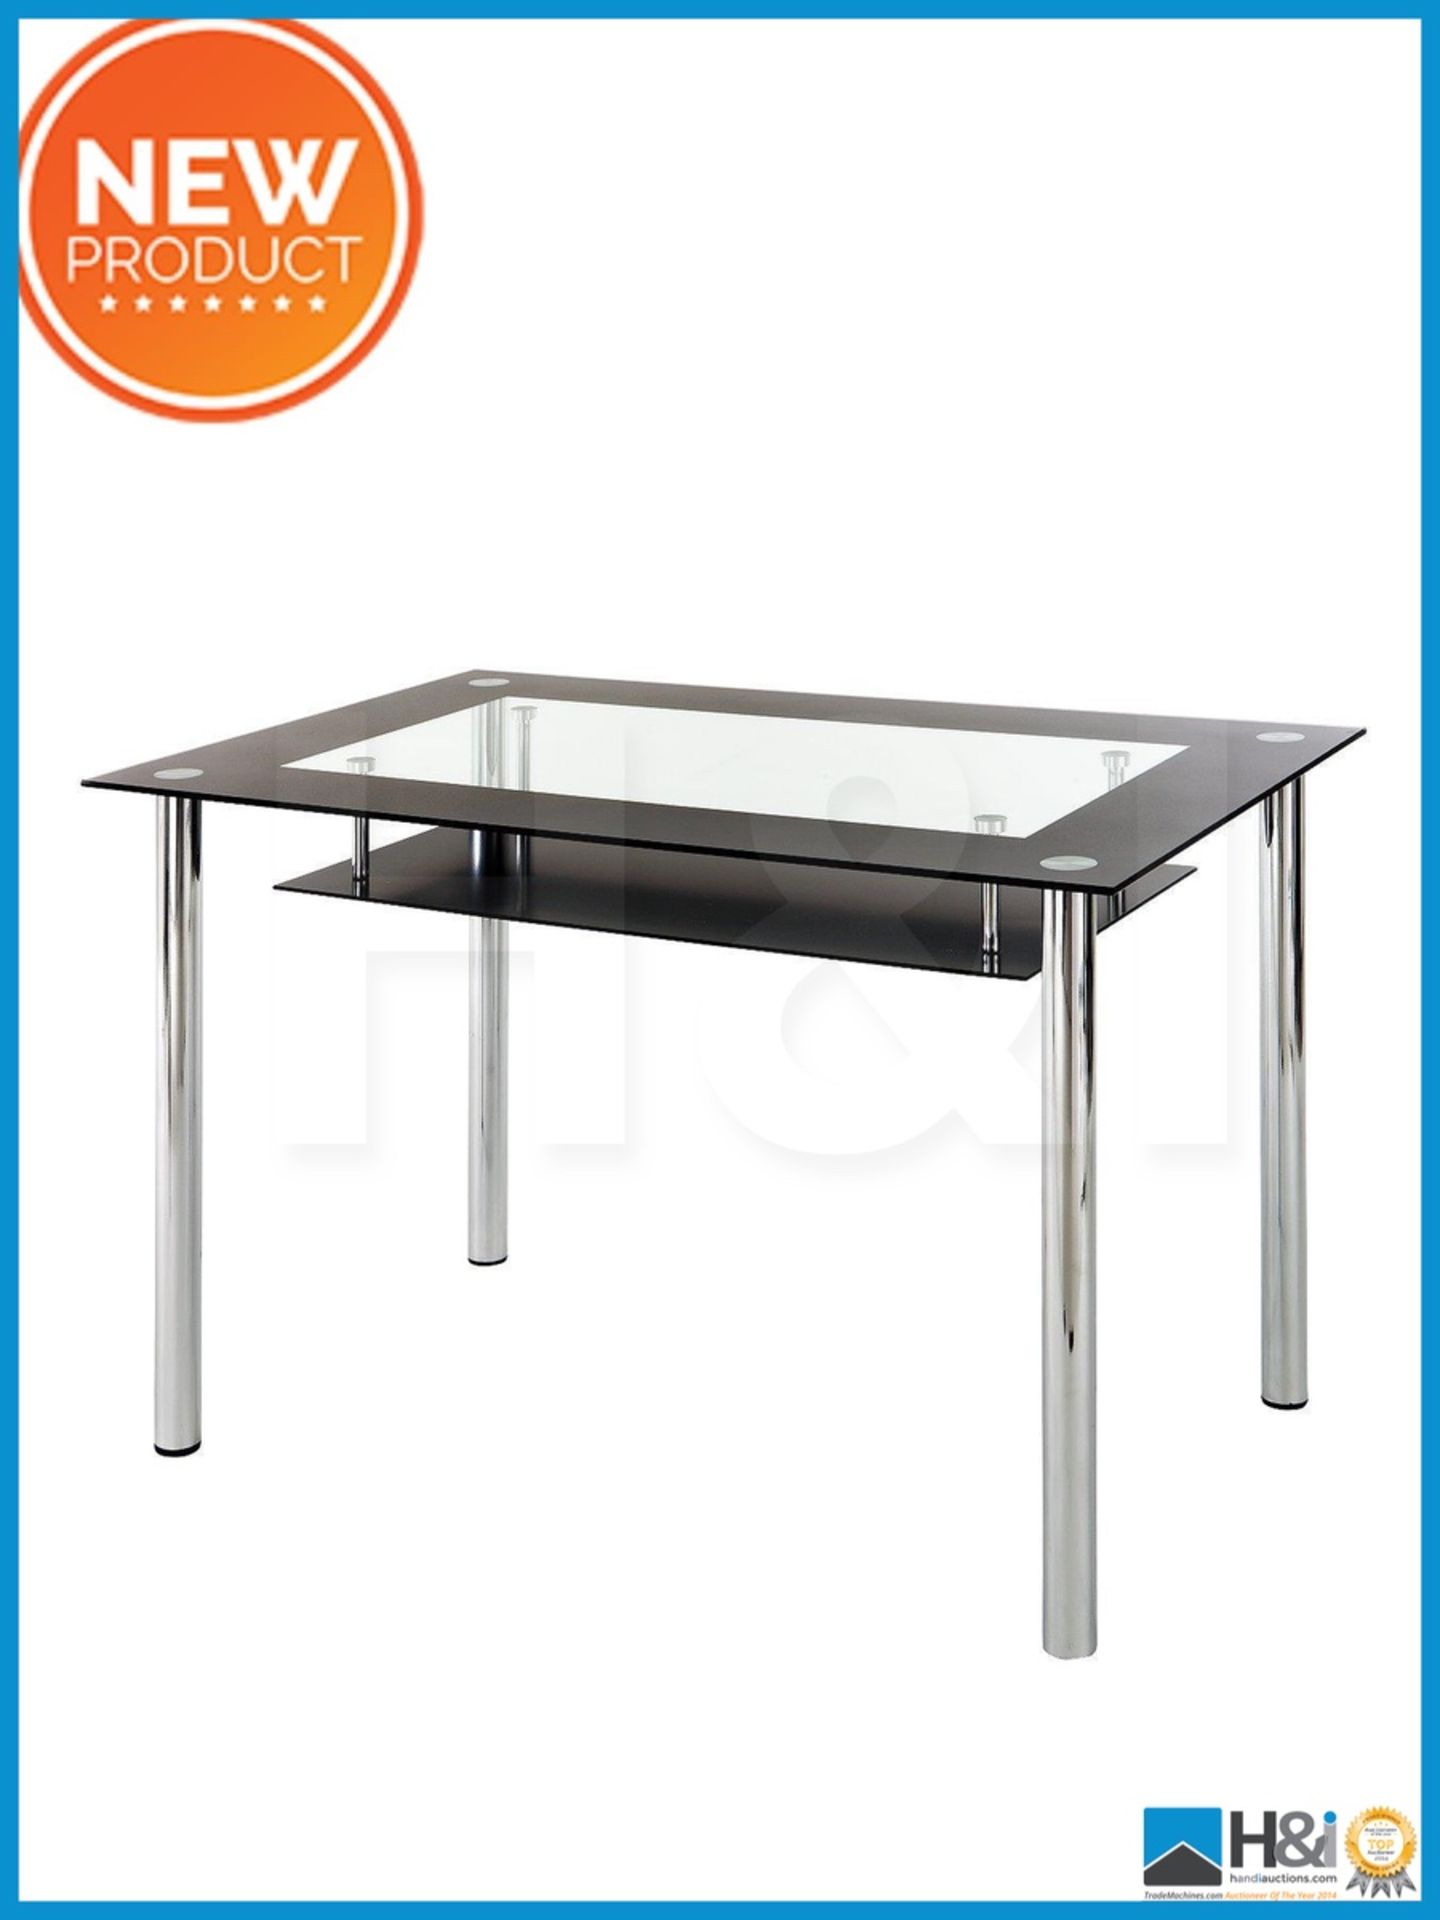 NEW IN BOX VIENNA DINING TABLE [BLACK] 76 x 76 x 120cm RRP £389 Appraisal: Viewing Essential